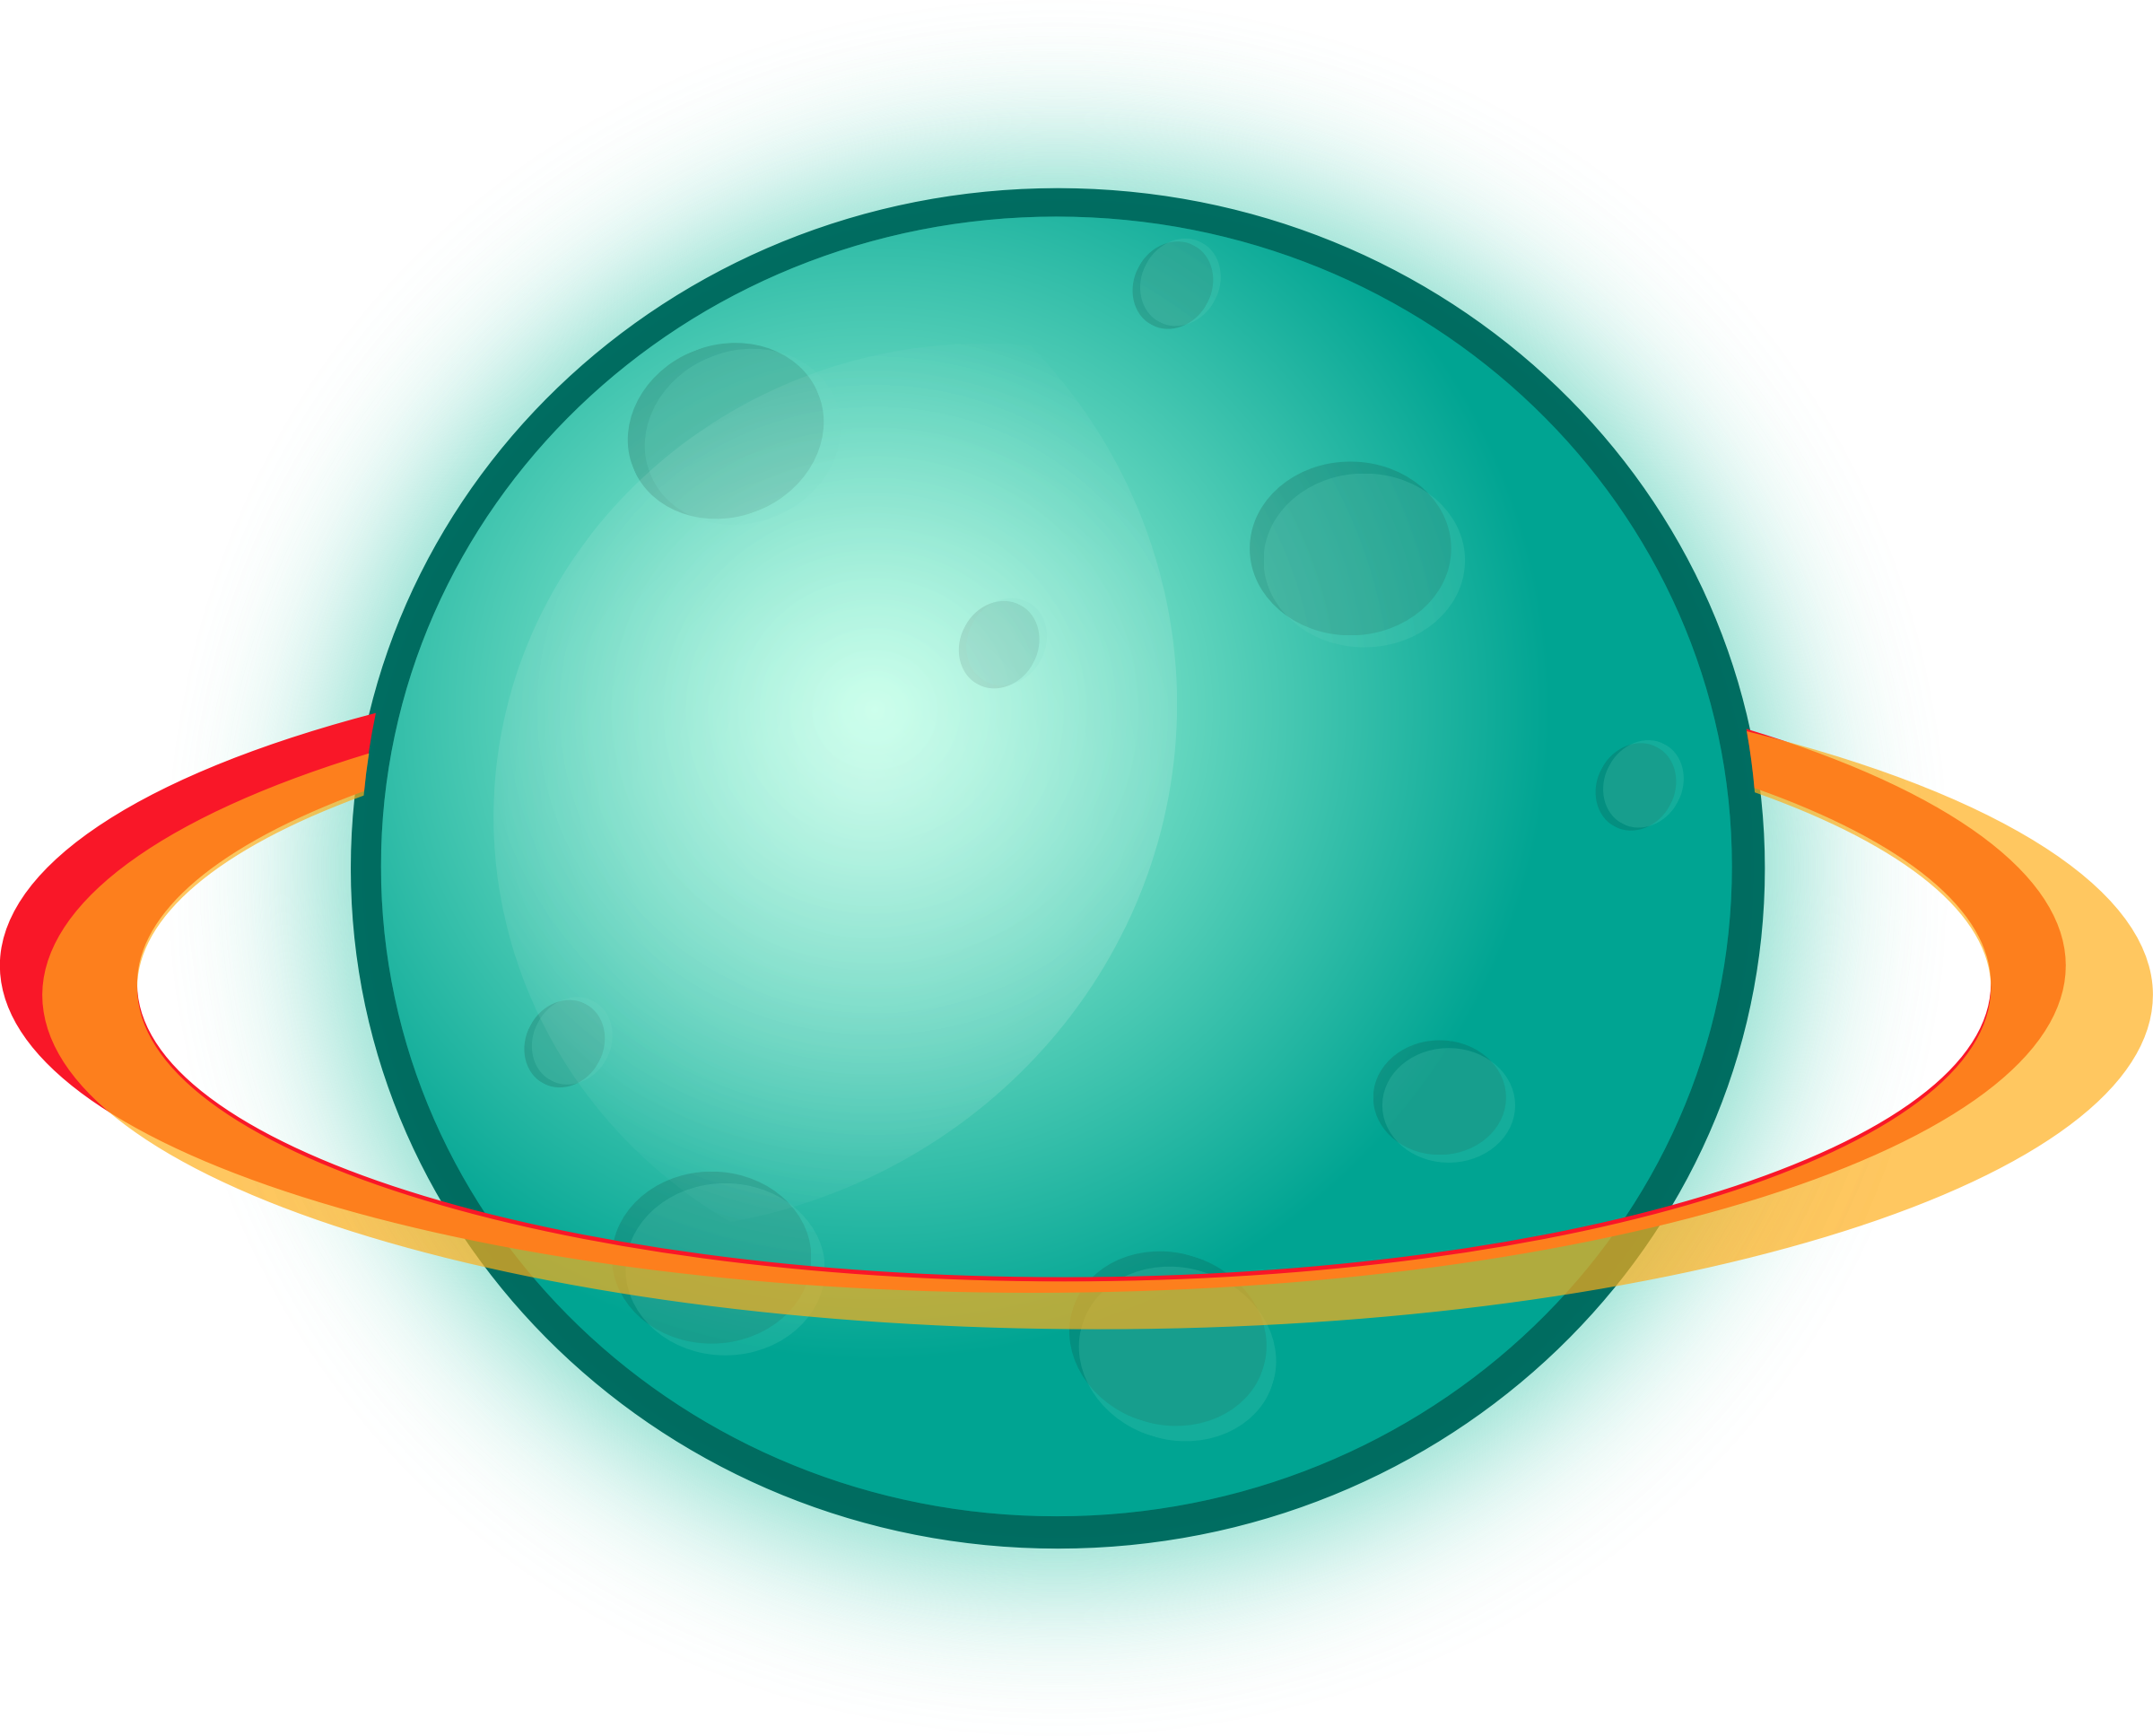 Stylized Planetwith Rings